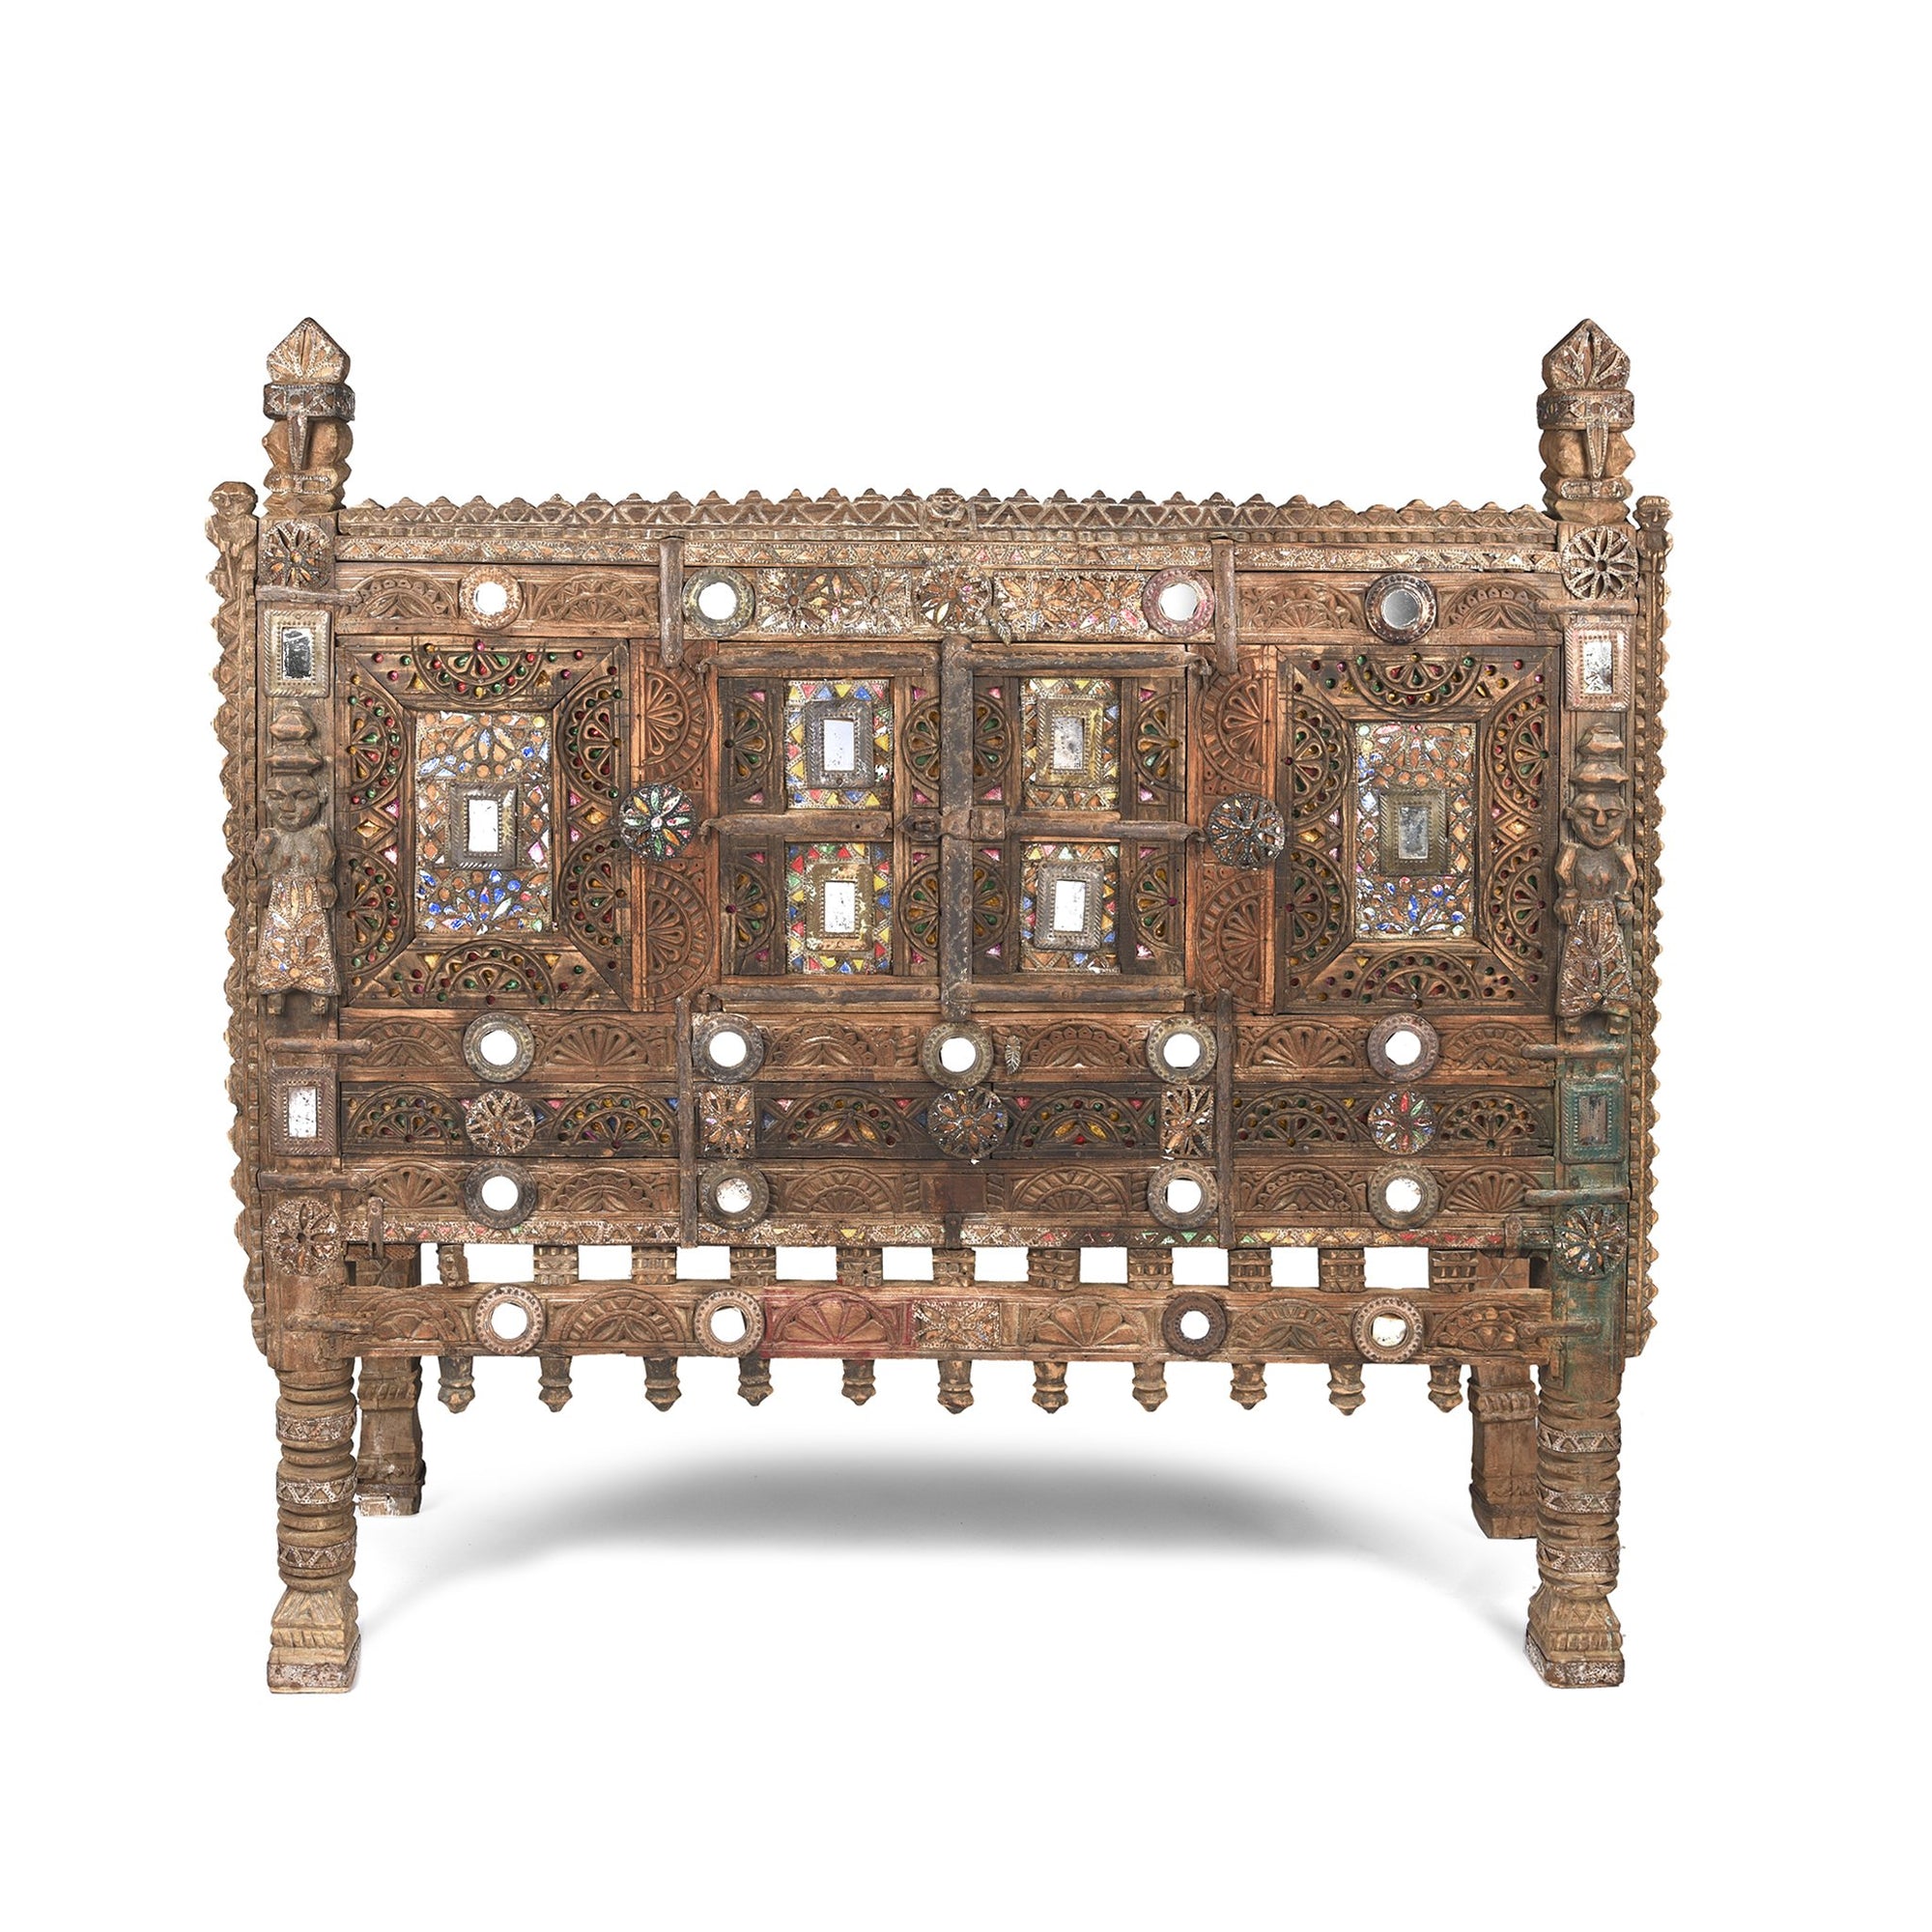 These carved Indian damchiya chests from The Rann of Kutch are classic examples of the furniture in the area. Their beautiful carving and mirror work is unique and they were used as dowry chests.